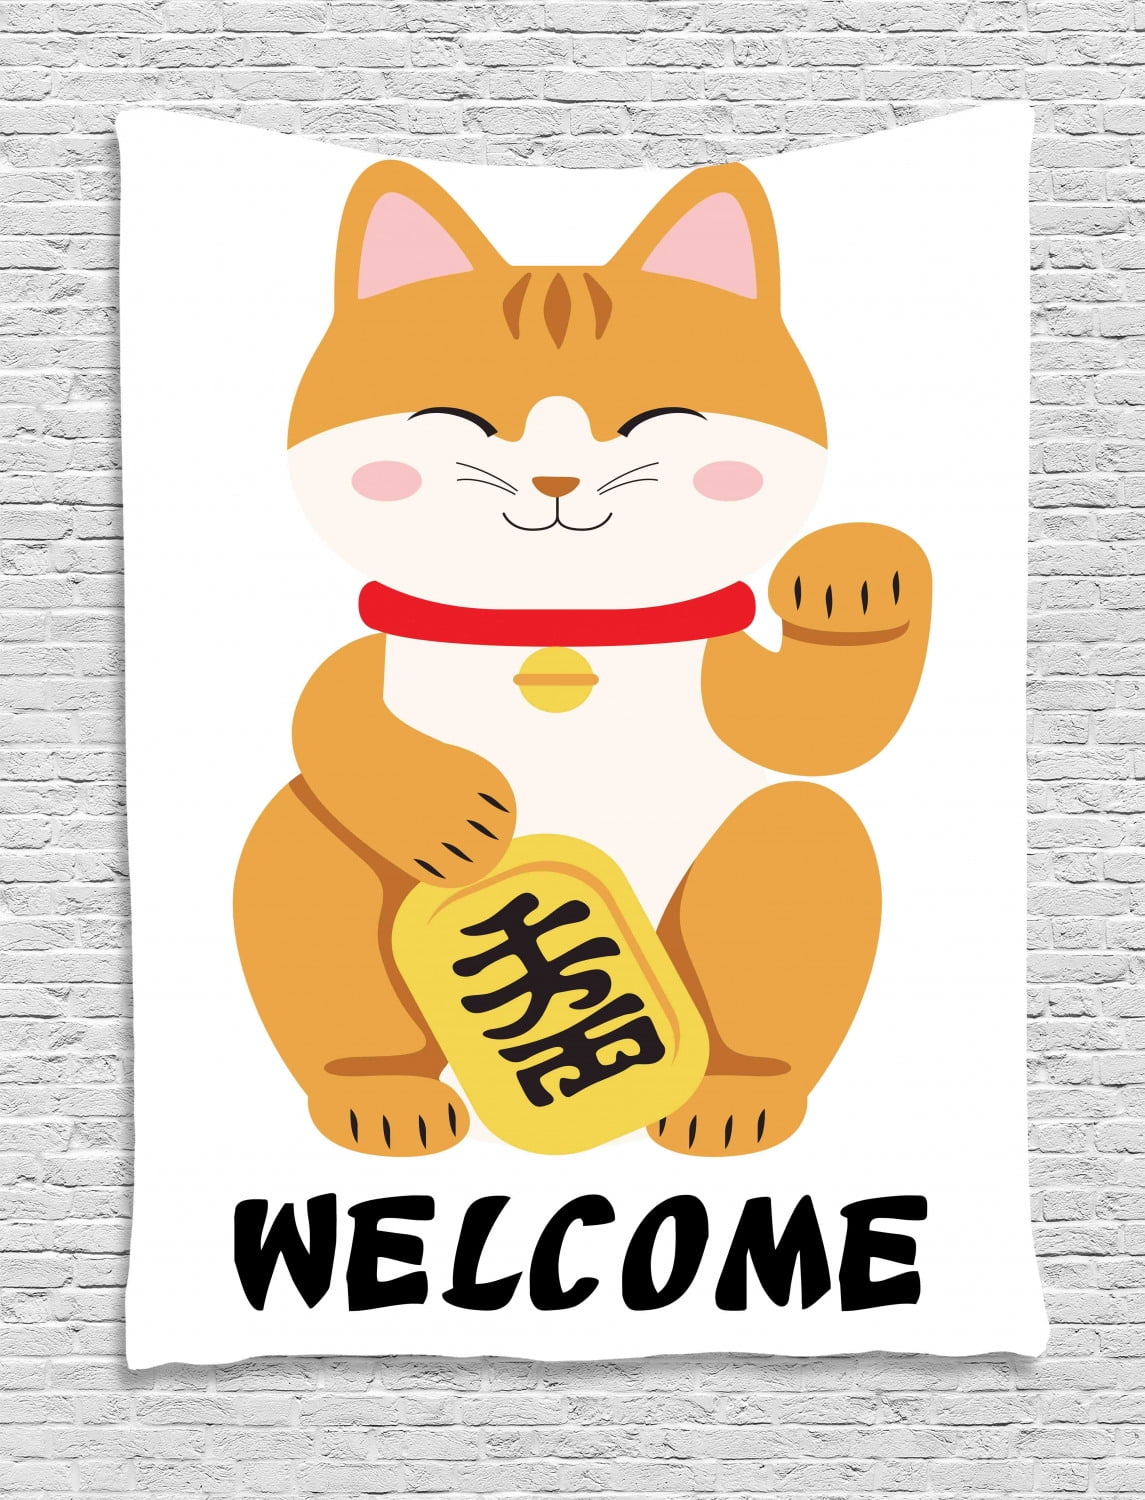 hydrogen parkere Et hundrede år Japanese Cat Tapestry, Welcome Luck Cat Maneki Neko Meow Illustrated, Wall  Hanging for Bedroom Living Room Dorm Decor, 60W X 80L Inches, Apricot Ivory  Mustard Multicolor, by Ambesonne - Walmart.com